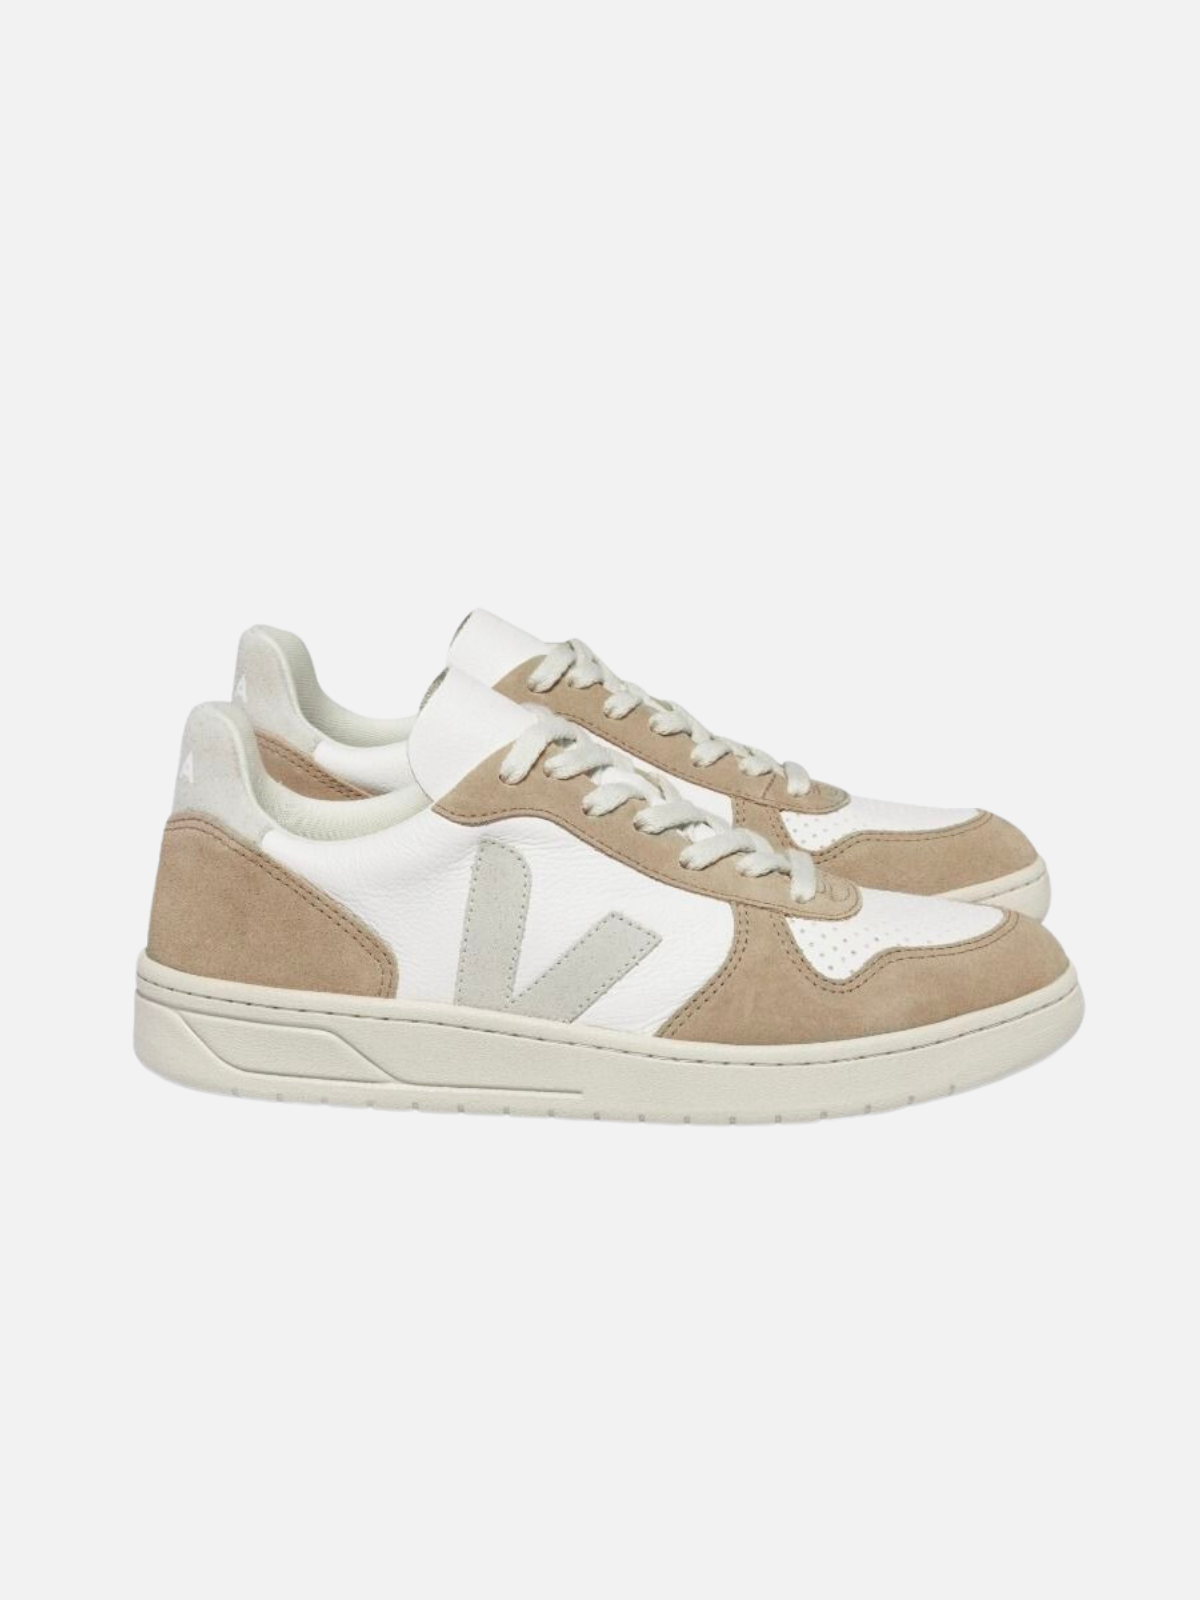 veja v-10 chromefree leather - extra white natural sahara tan silver light brown made from bovine leather, Amazonian rubber, sugar cane, organic cotton - kempt athens ga georgia men's clothing and shoes store downtown lumpkin street